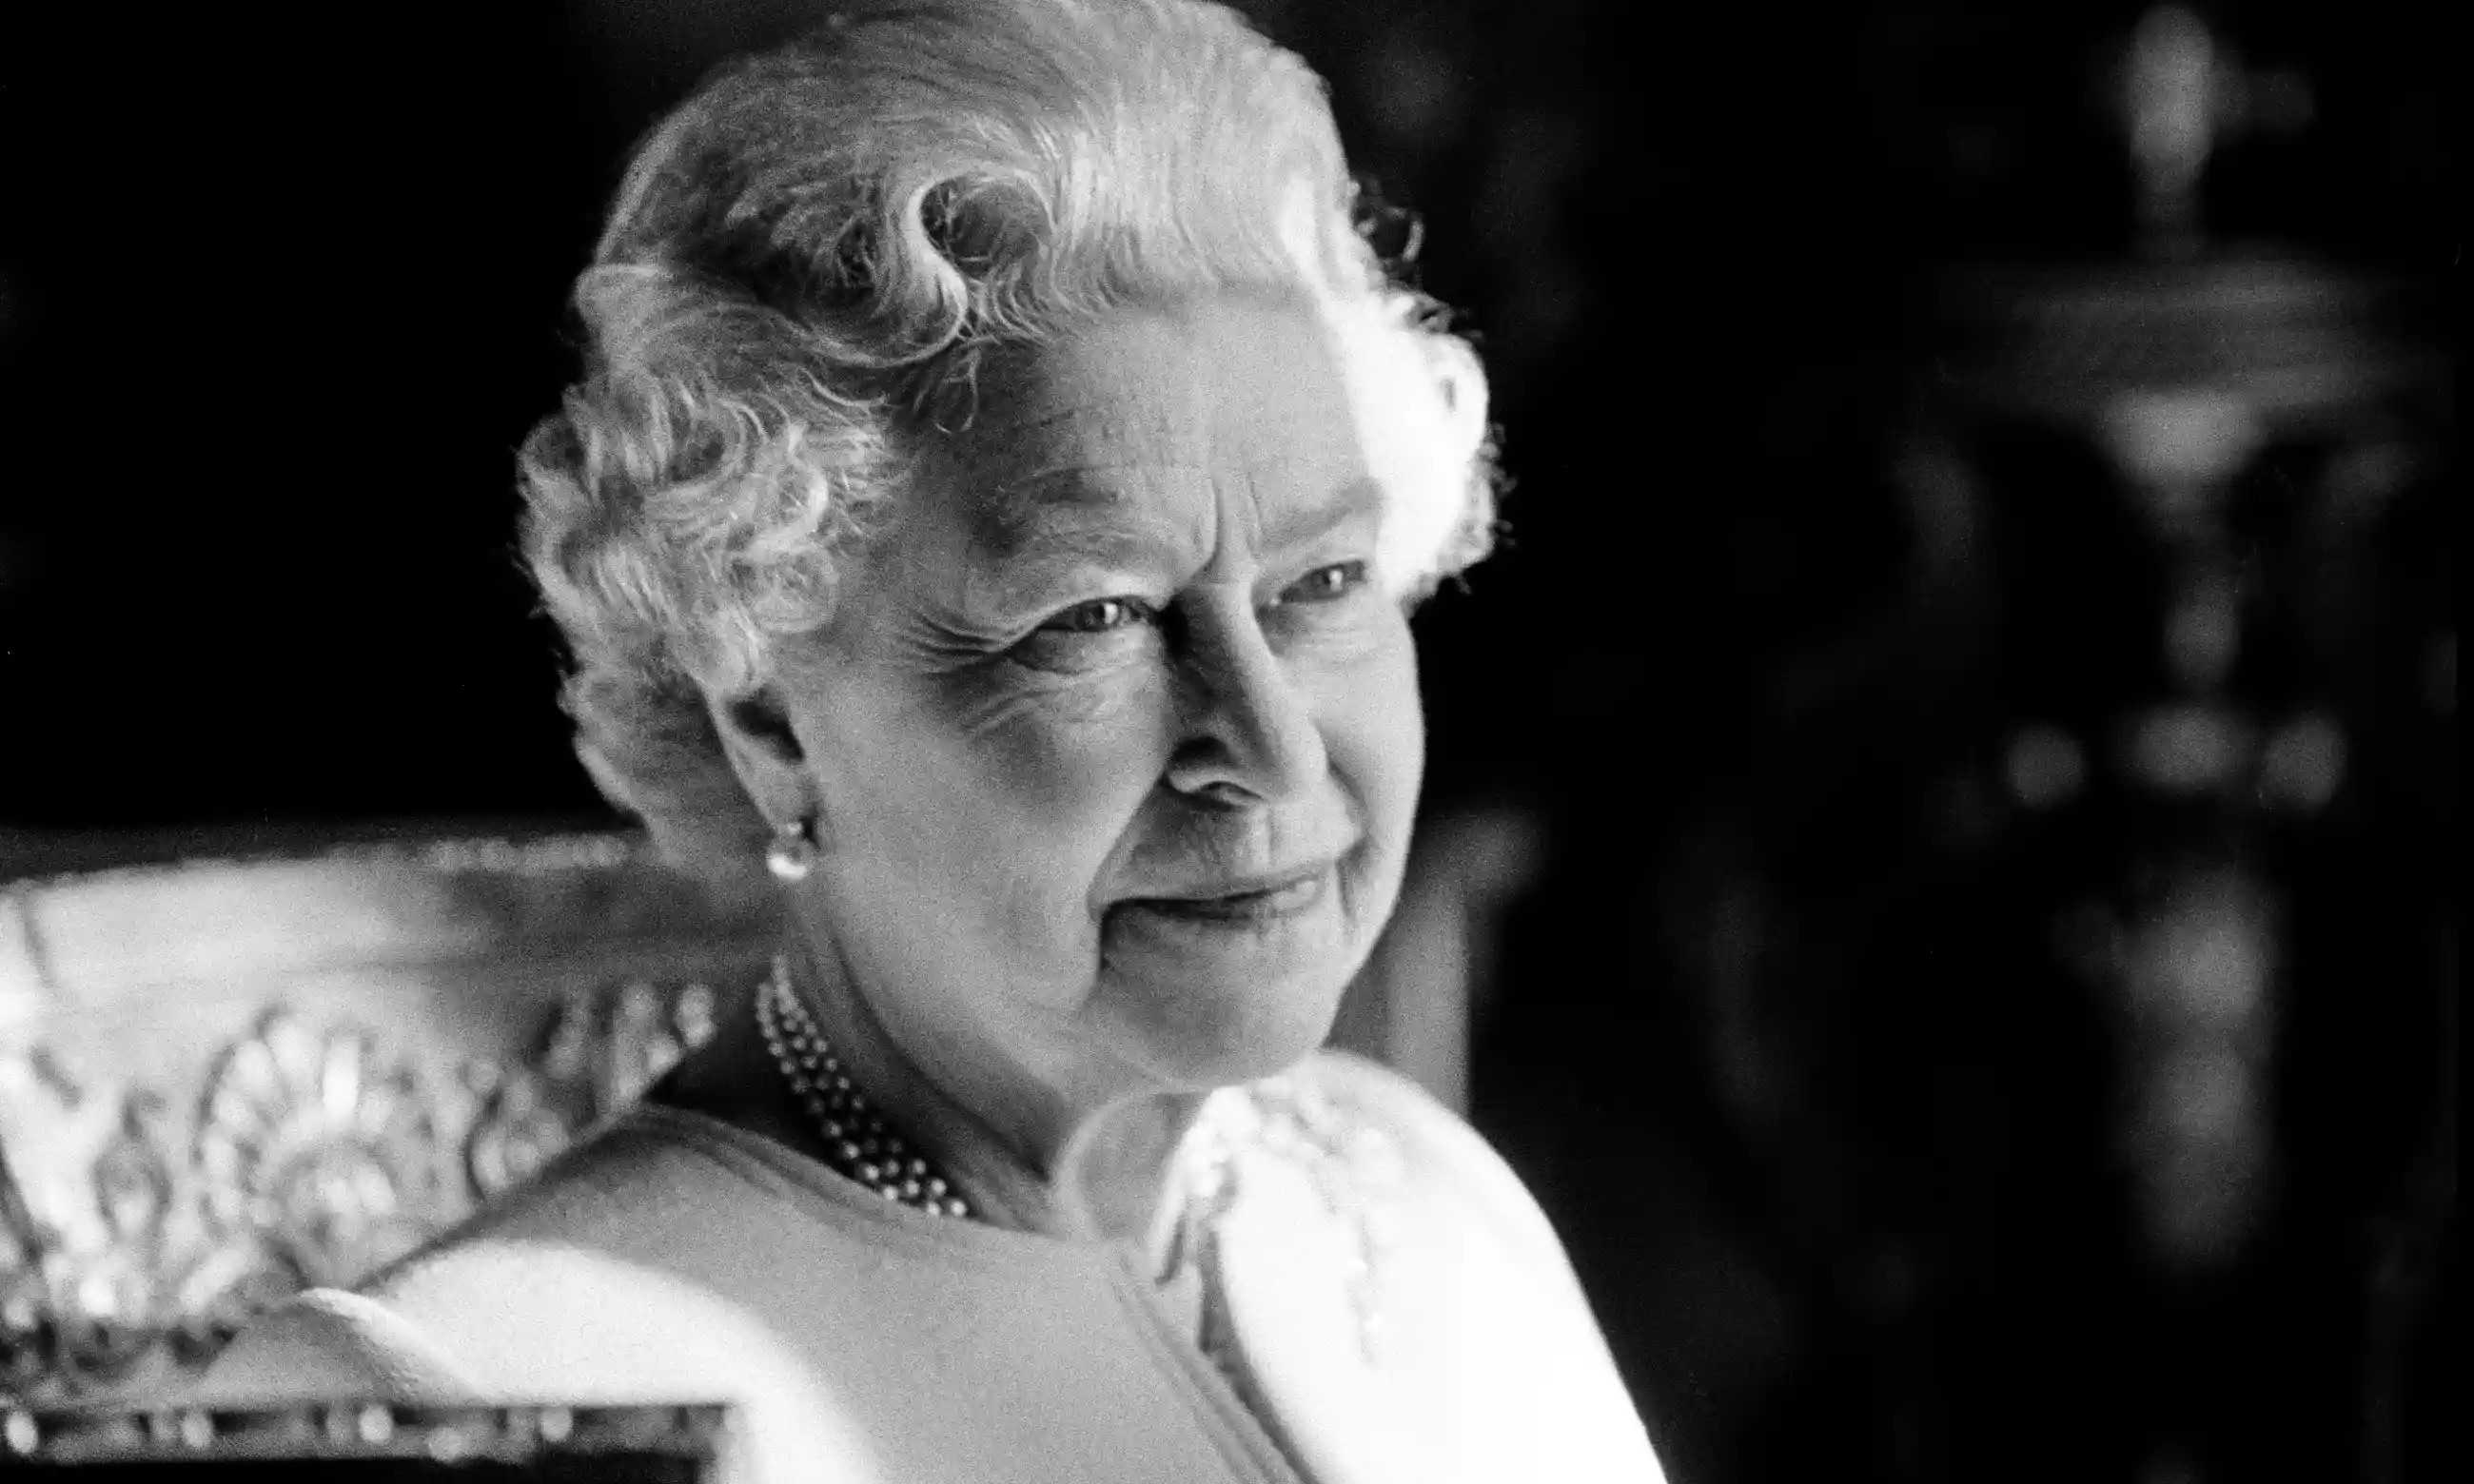 An image of Her Majesty Queen Elizabeth II in monochrome as released by the palace on the event of her death.